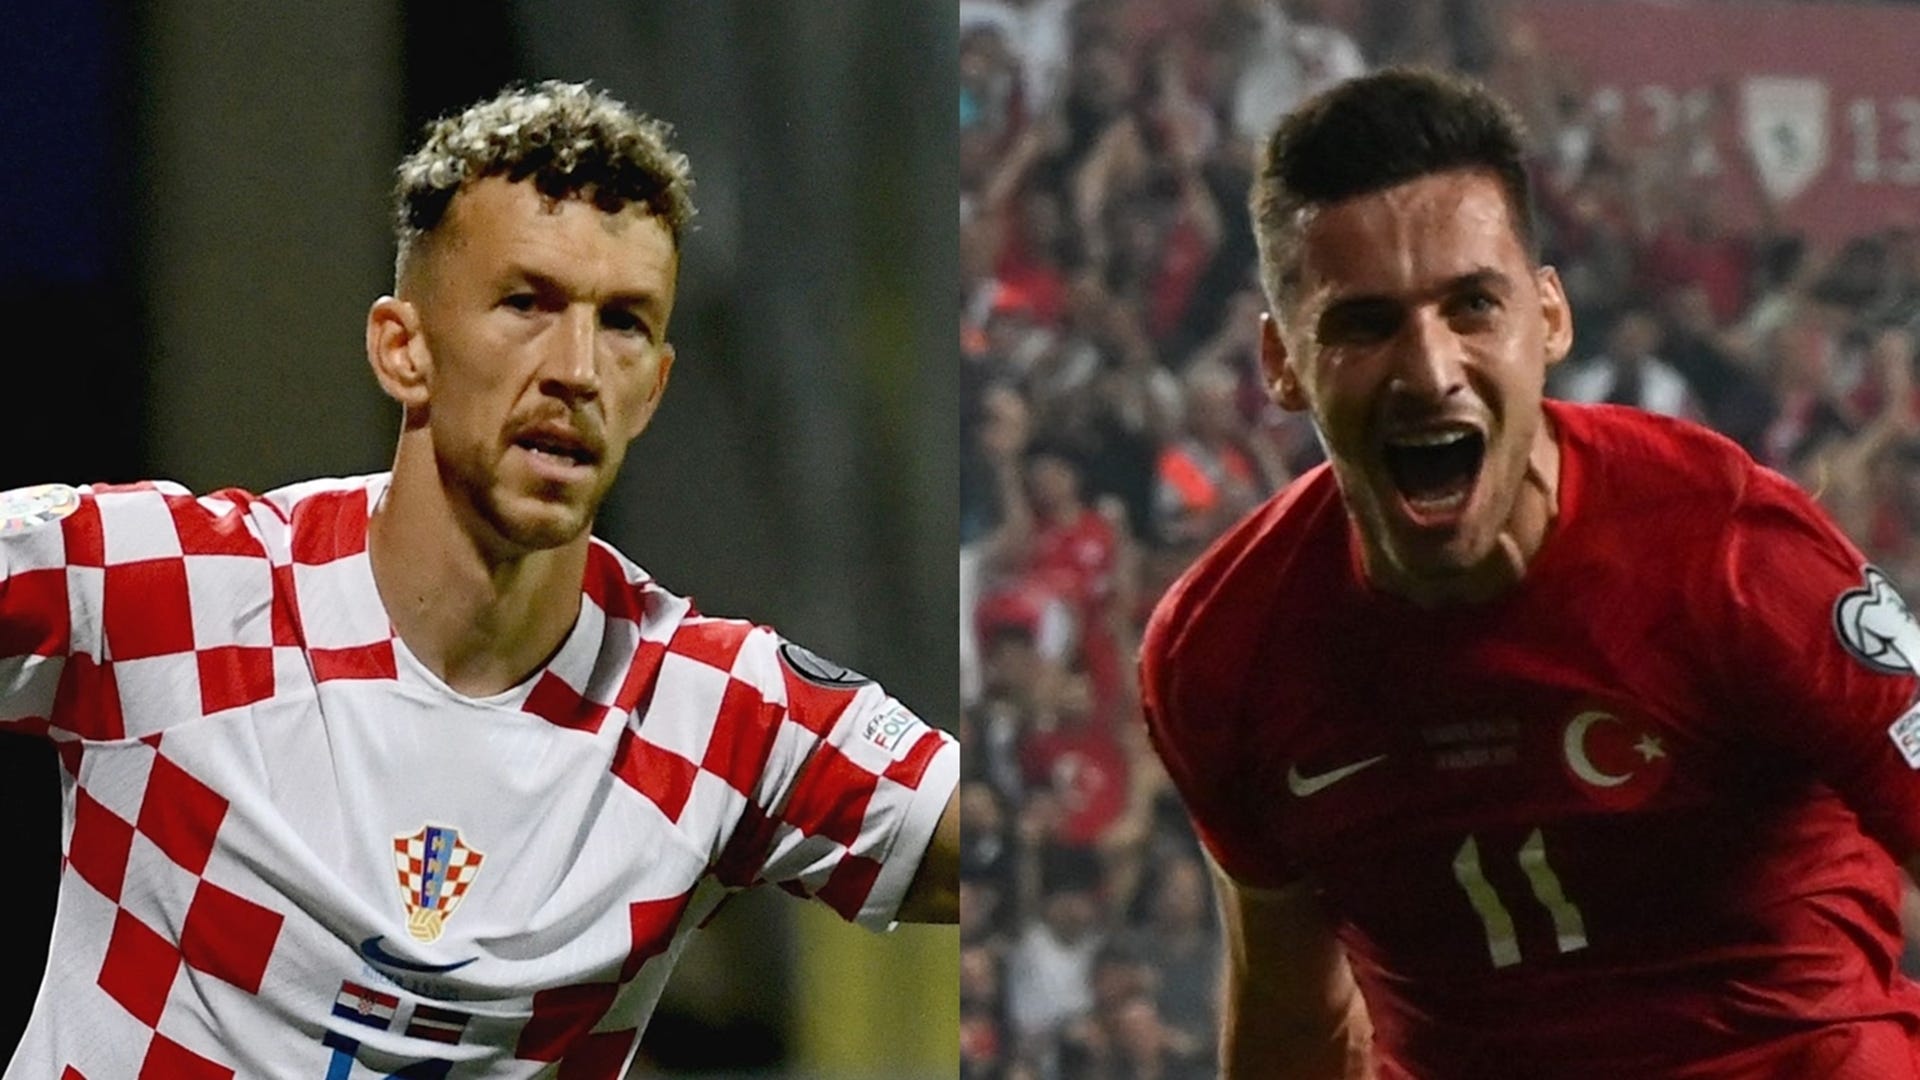 Croatia vs Turkey Live stream, TV channel, kick-off time and where to watch Goal US